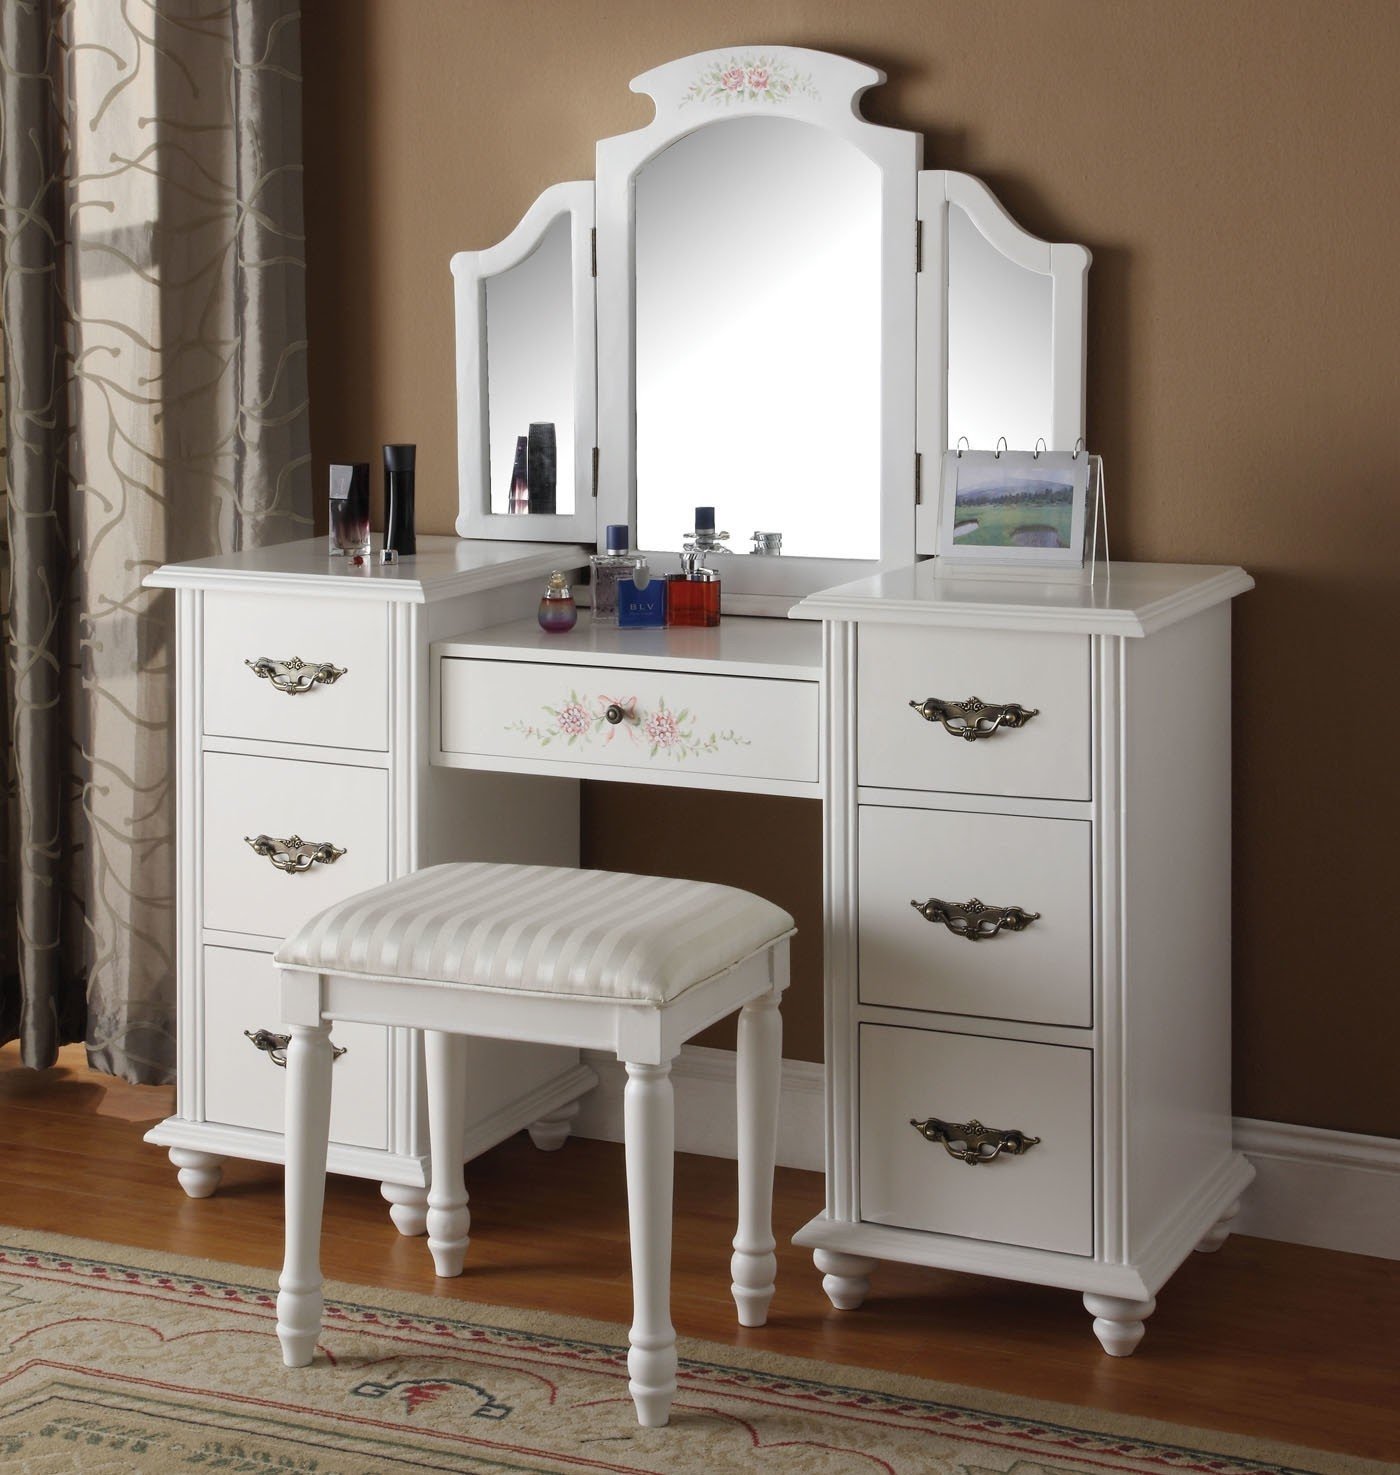 Makeup Vanity Table With Lighted Mirror, Light Up Makeup Vanity Set